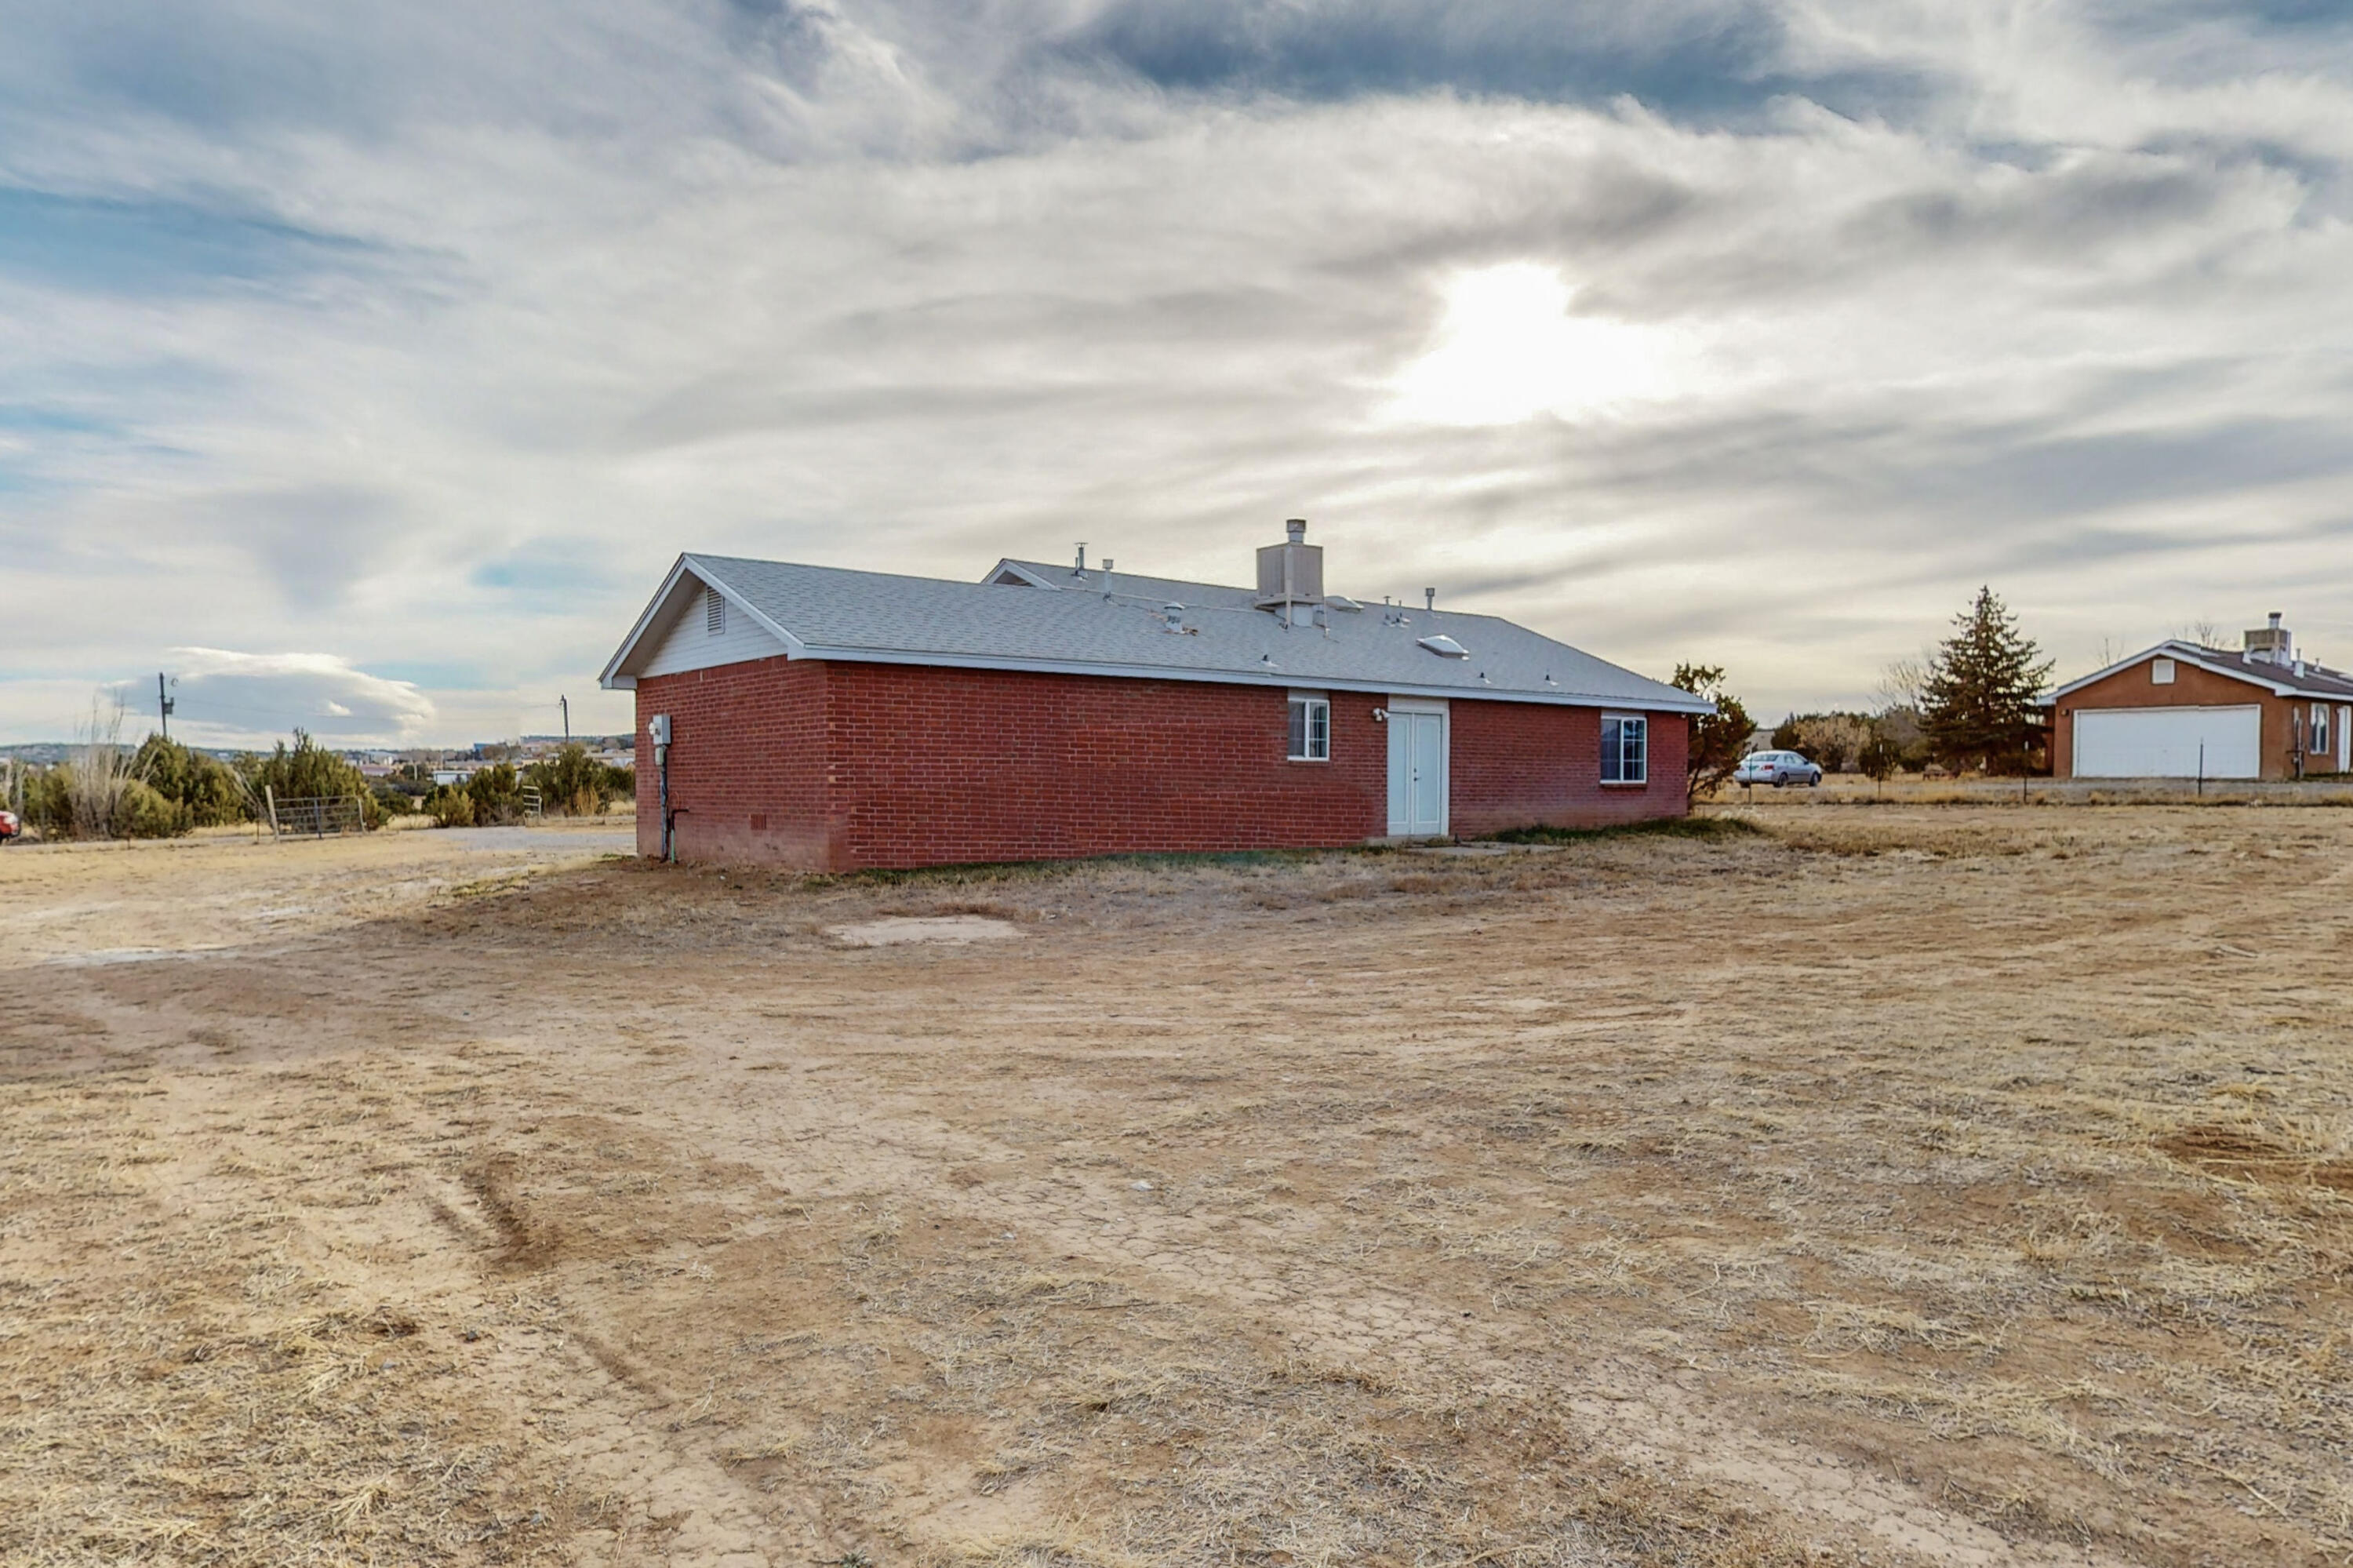 27 Mustang Road, Edgewood, New Mexico 87015, 3 Bedrooms Bedrooms, ,2 BathroomsBathrooms,Residential,For Sale,27 Mustang Road,1045095